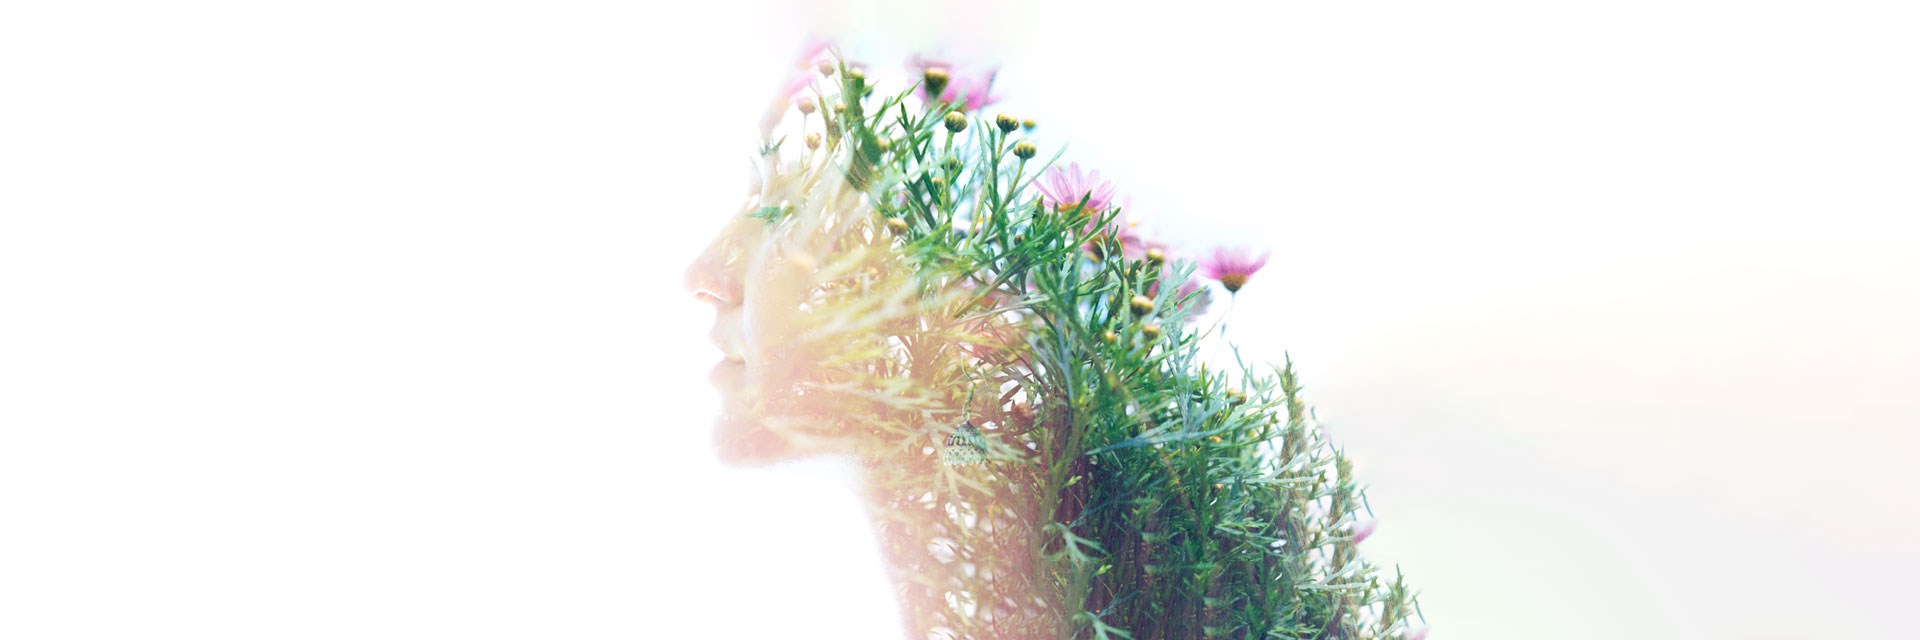 Conceptual image of woman and flowers